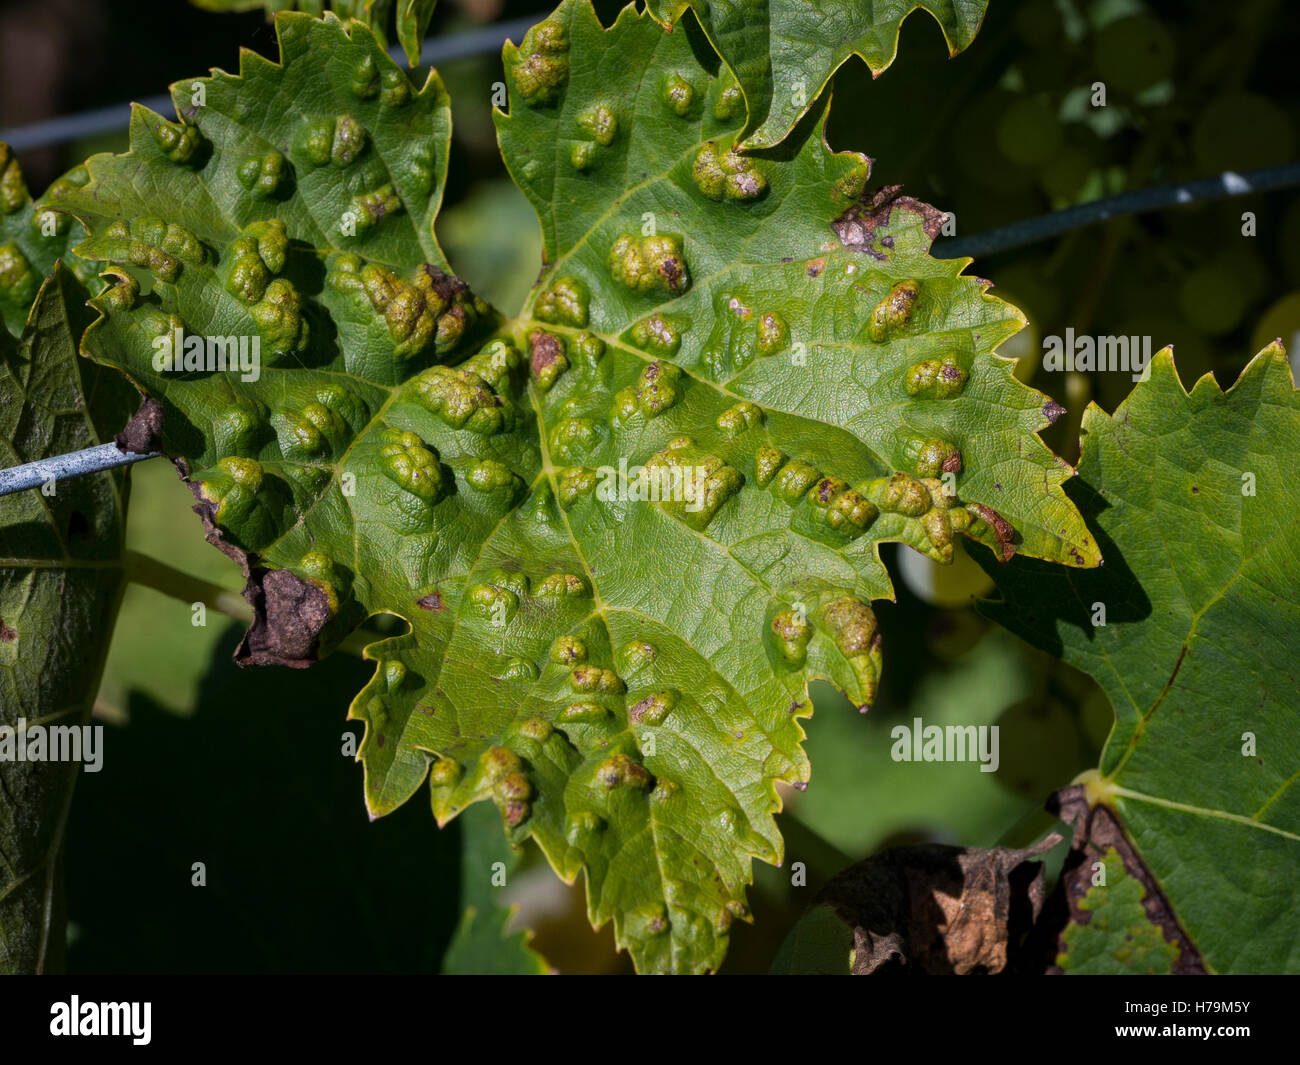 Eriophyes vitis is a mite  infecting grape leaves. Disease of the vine. Leaves present puffinesse. Stock Photo